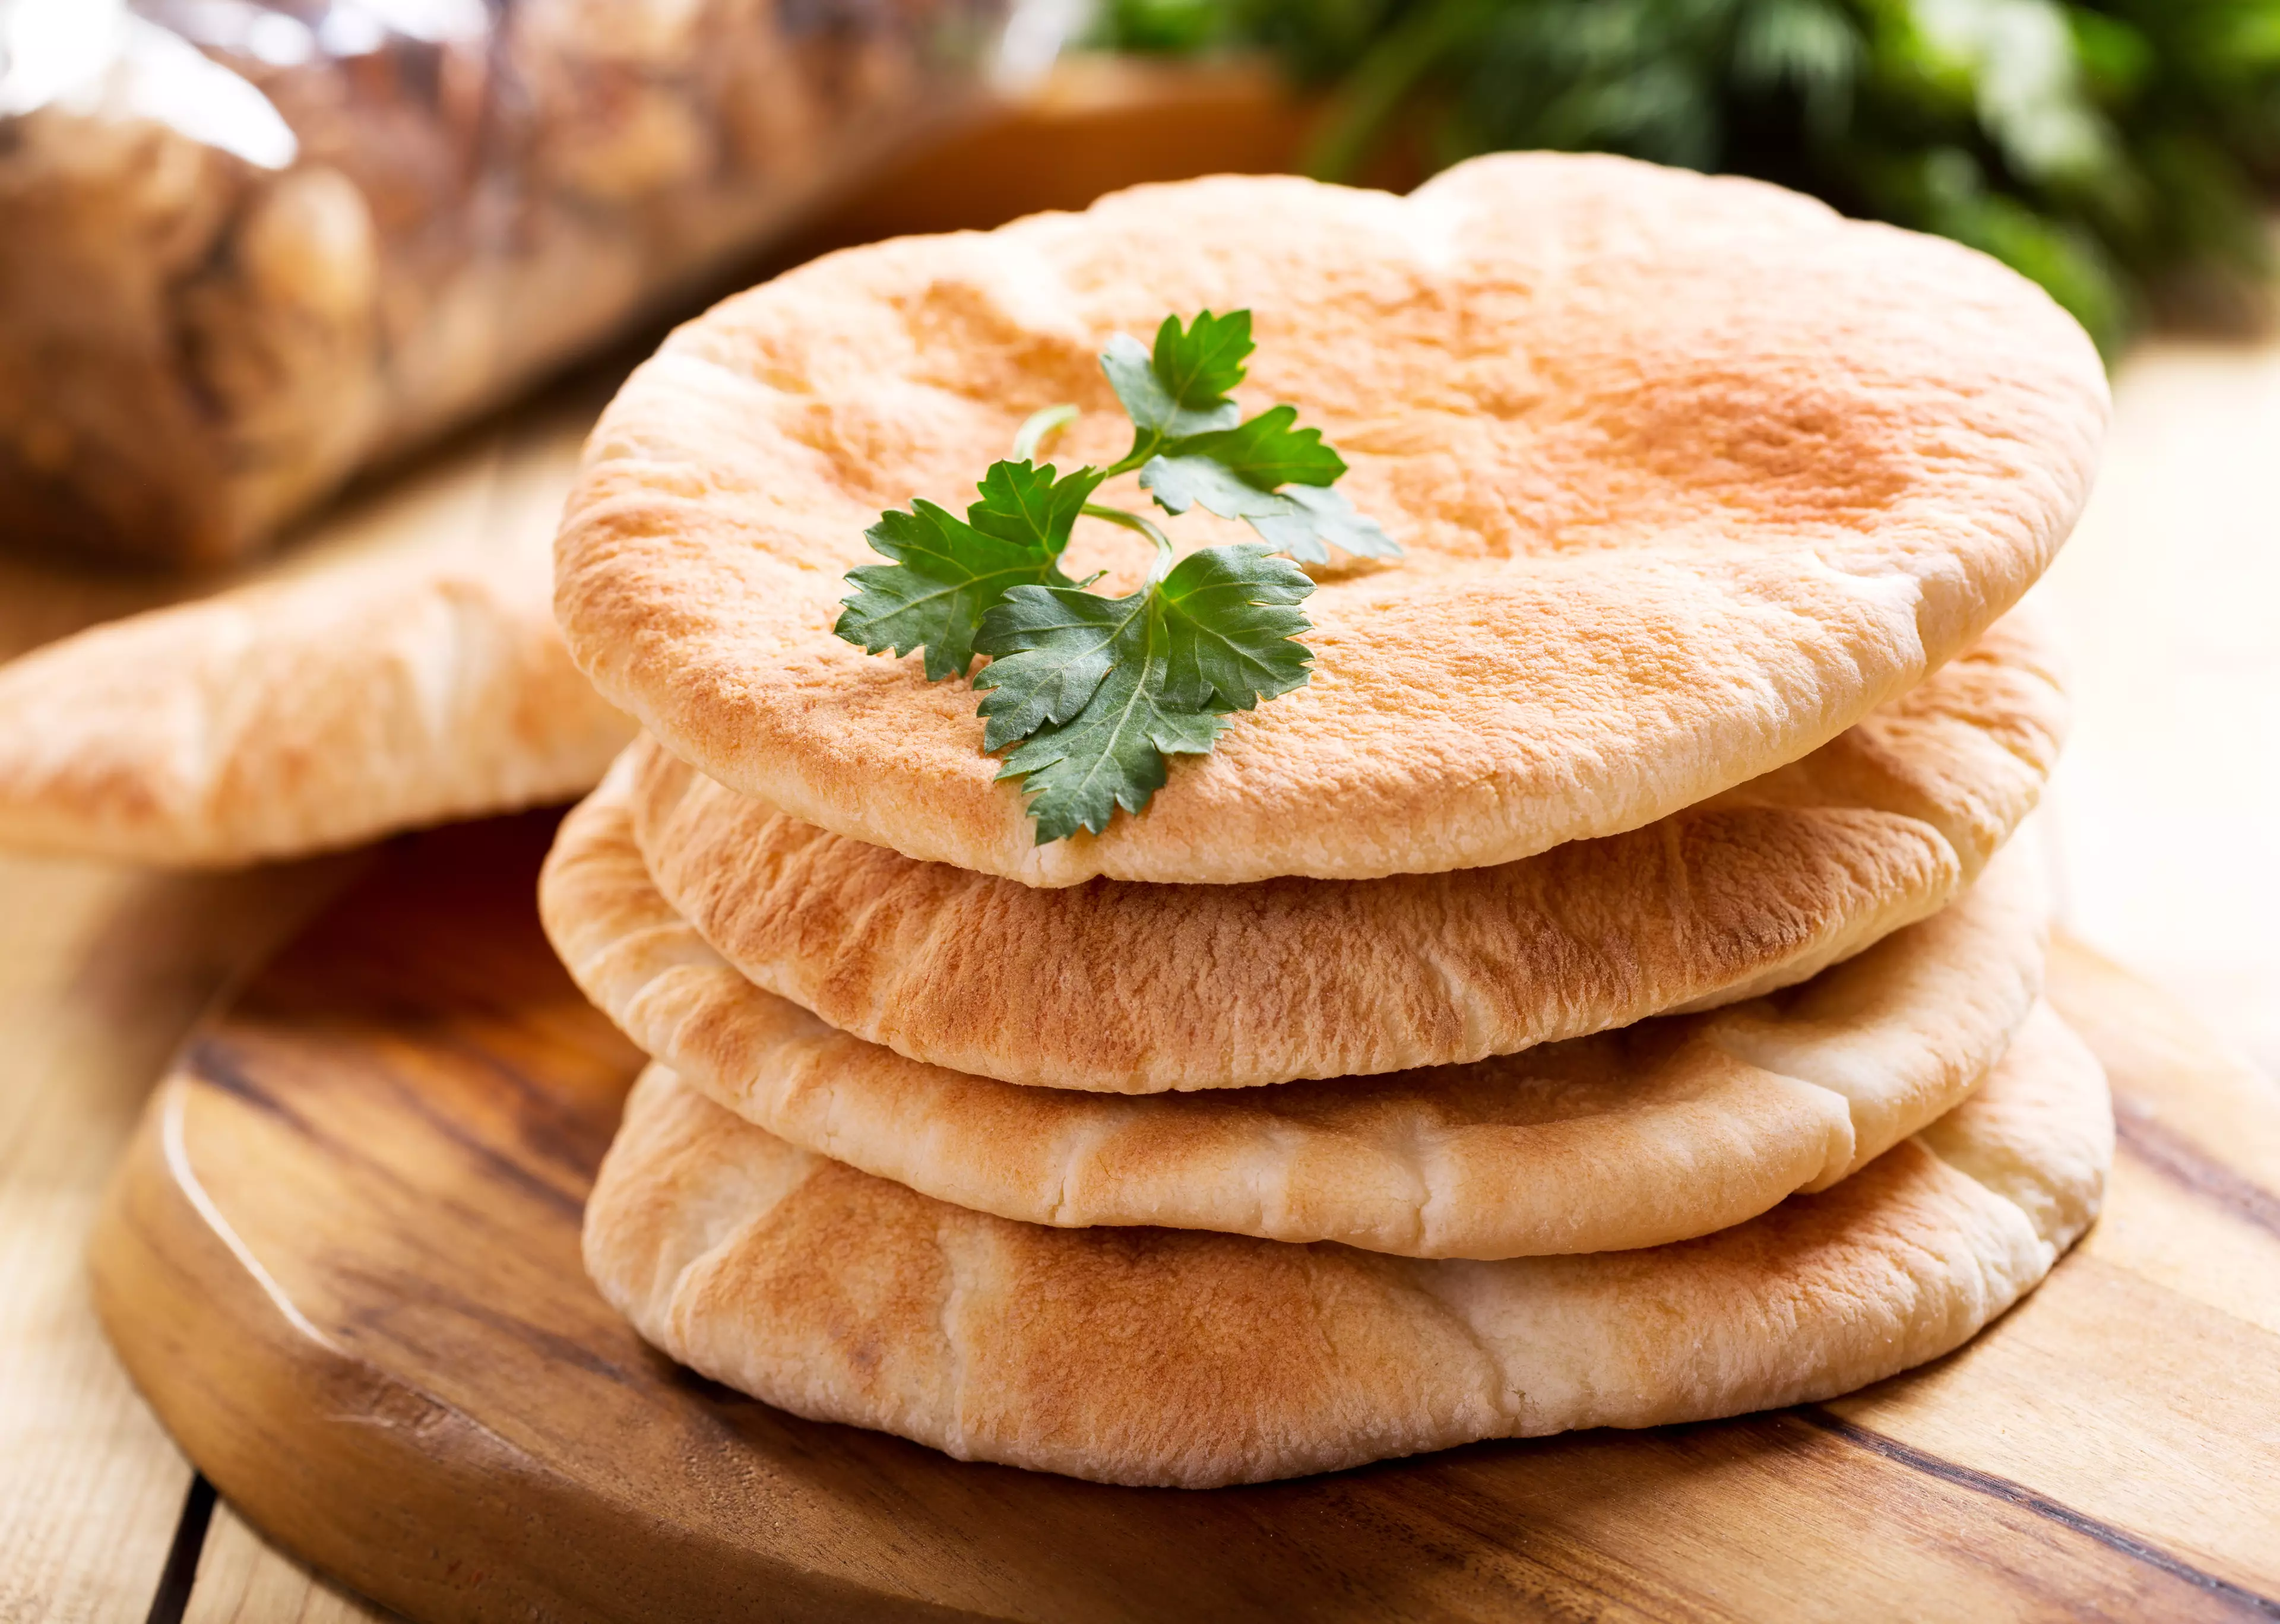 How do you cut your pitta bread? (